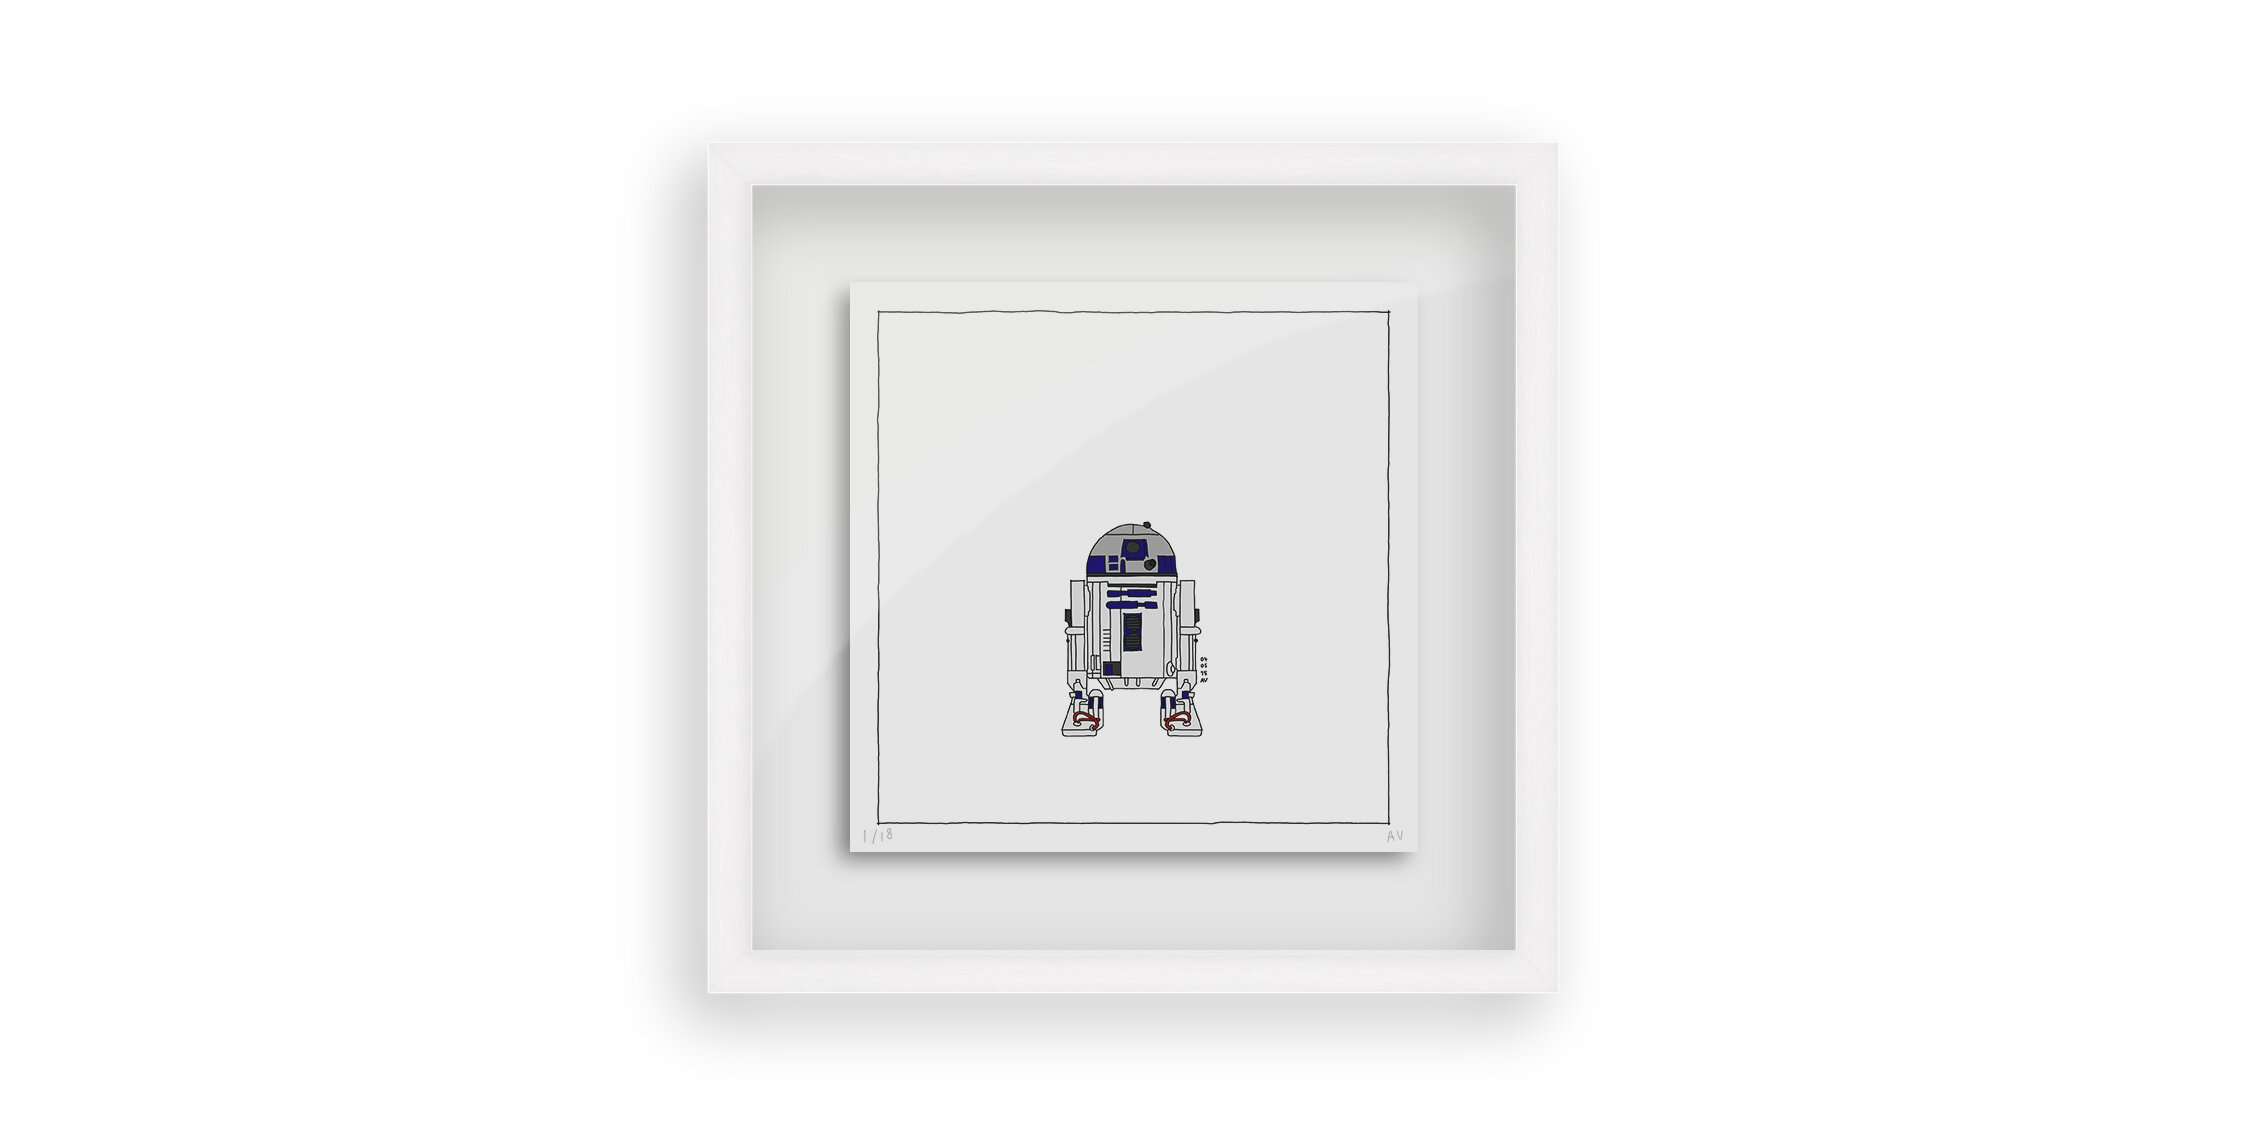 Star Wars R2D2 - Persona Art Project (Ant Vervoort Hand Drawing)